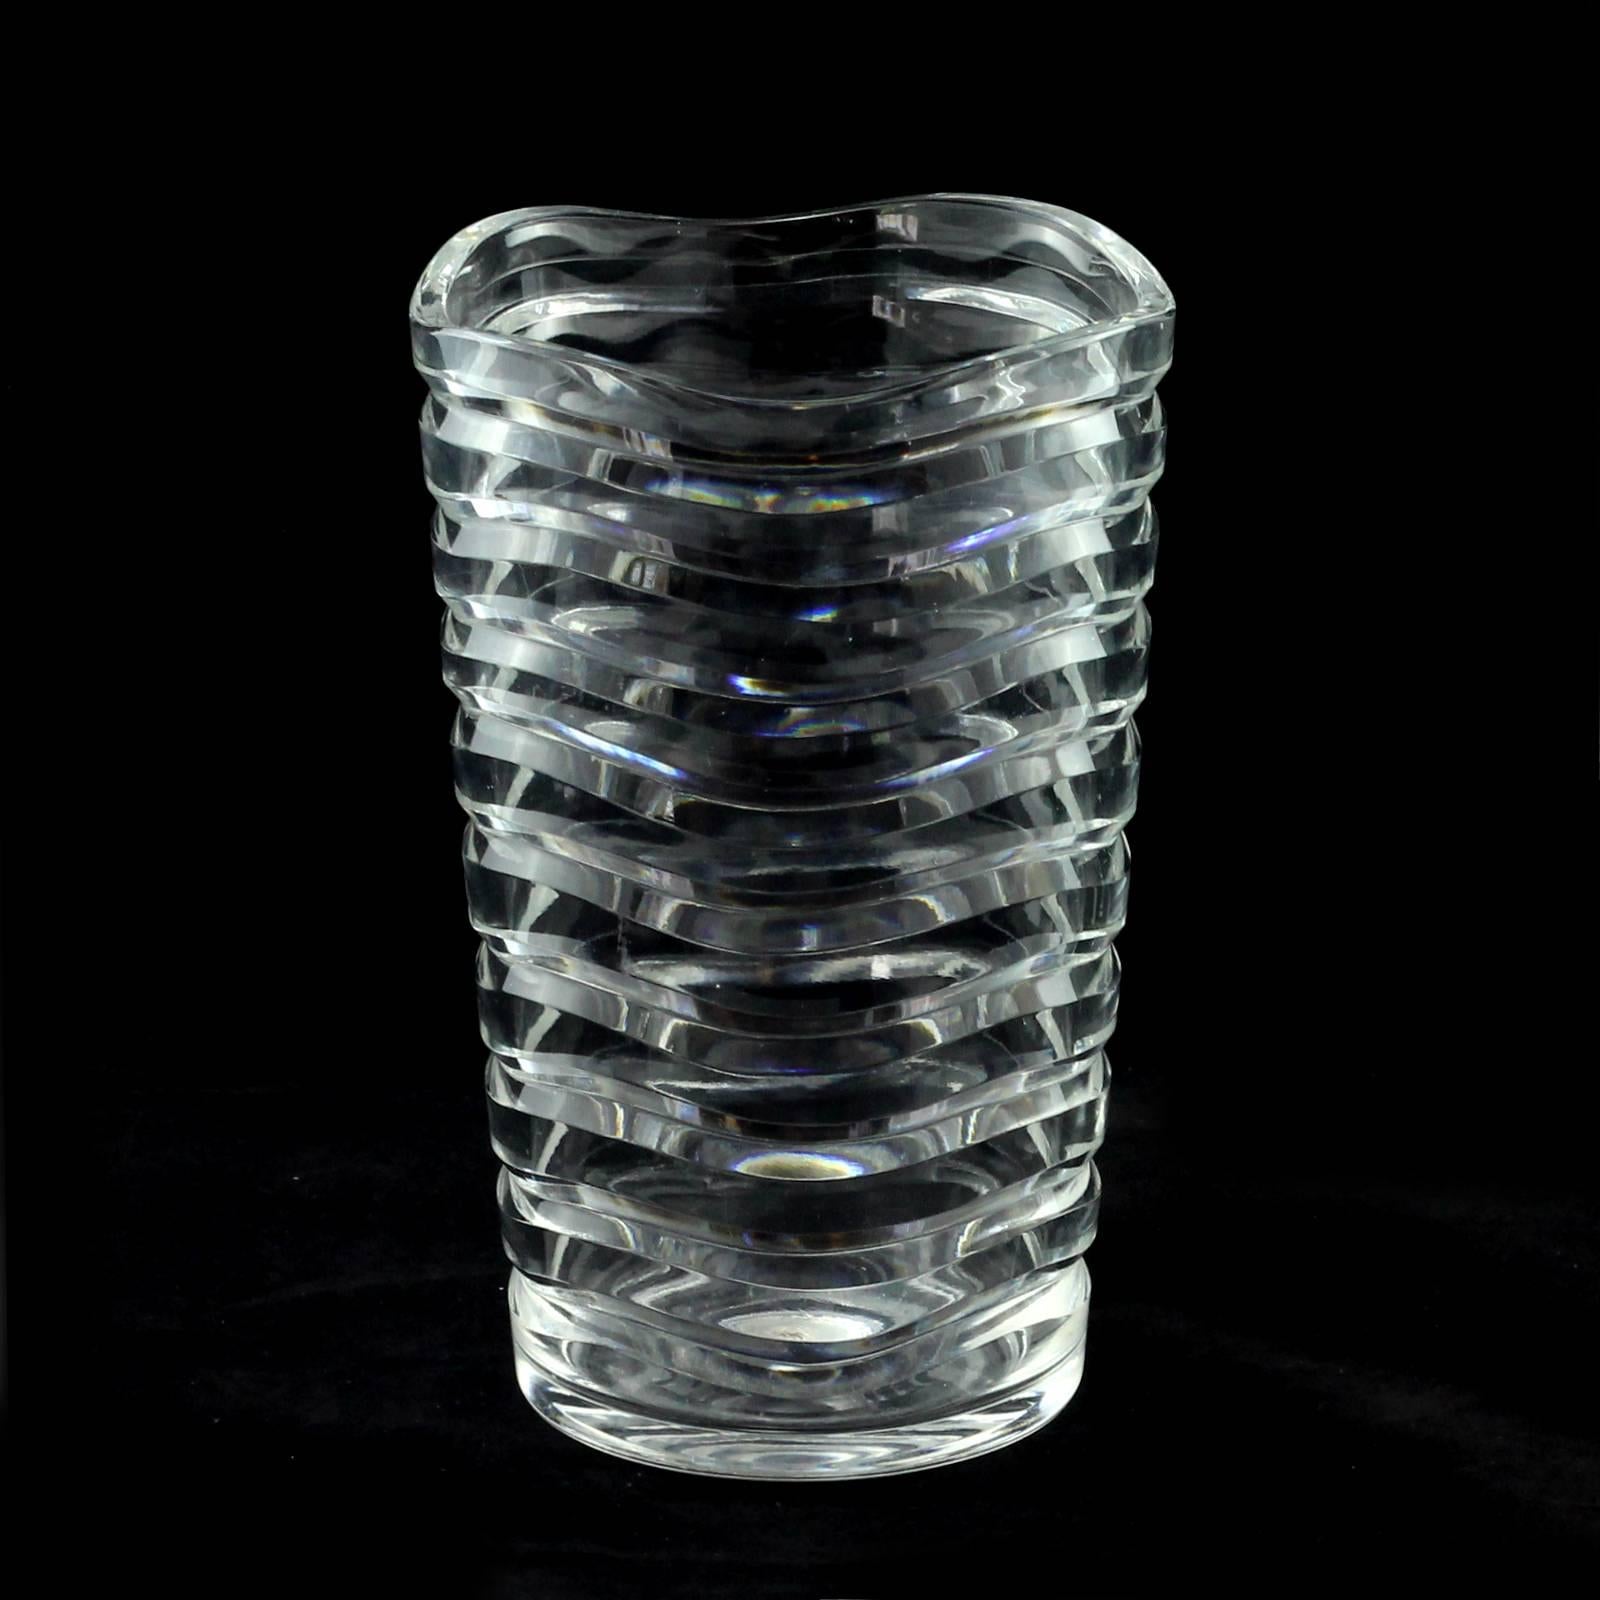 The design of this vase was the result of Keith Murray's time at the Royal Brierley glass company. Its form mimics the pattern of waves and creates a charming optical effect when filled with water.